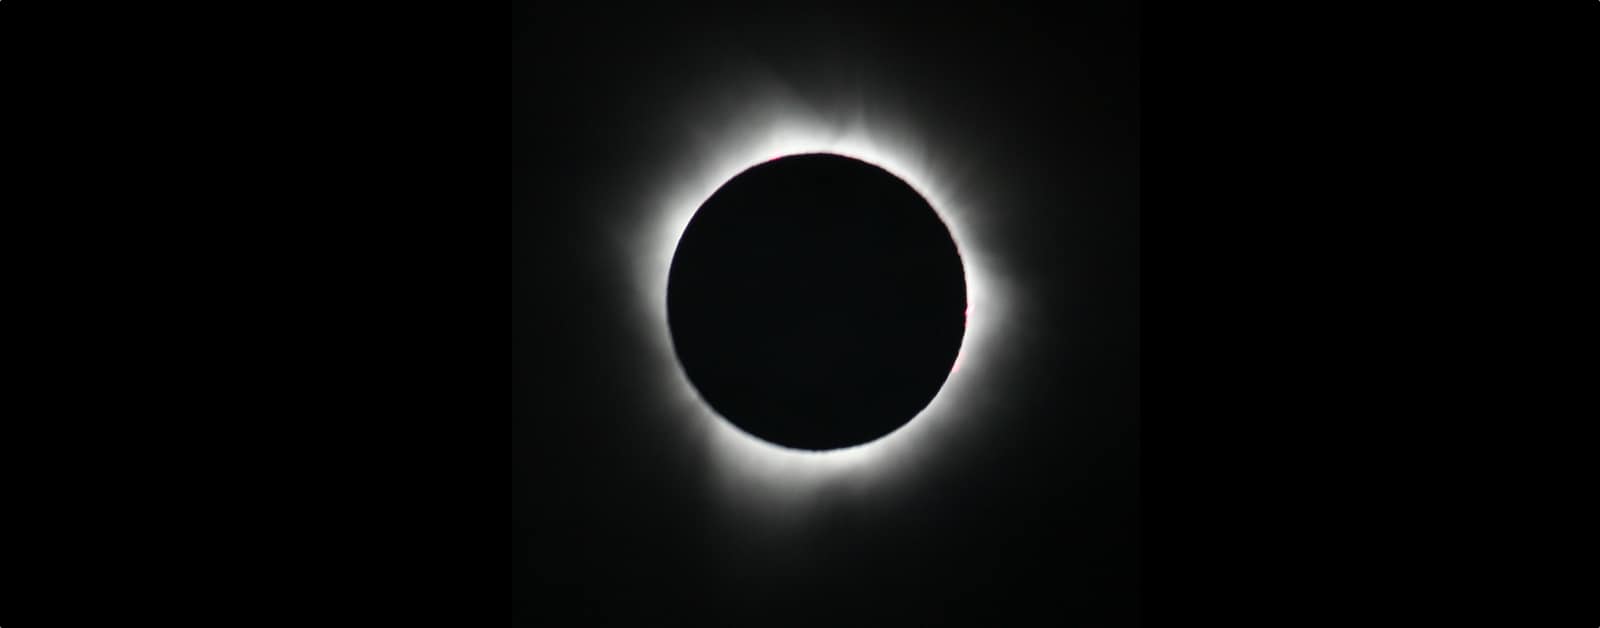 Last Minute Tips for Taking Eclipse Photos With Your iPhone